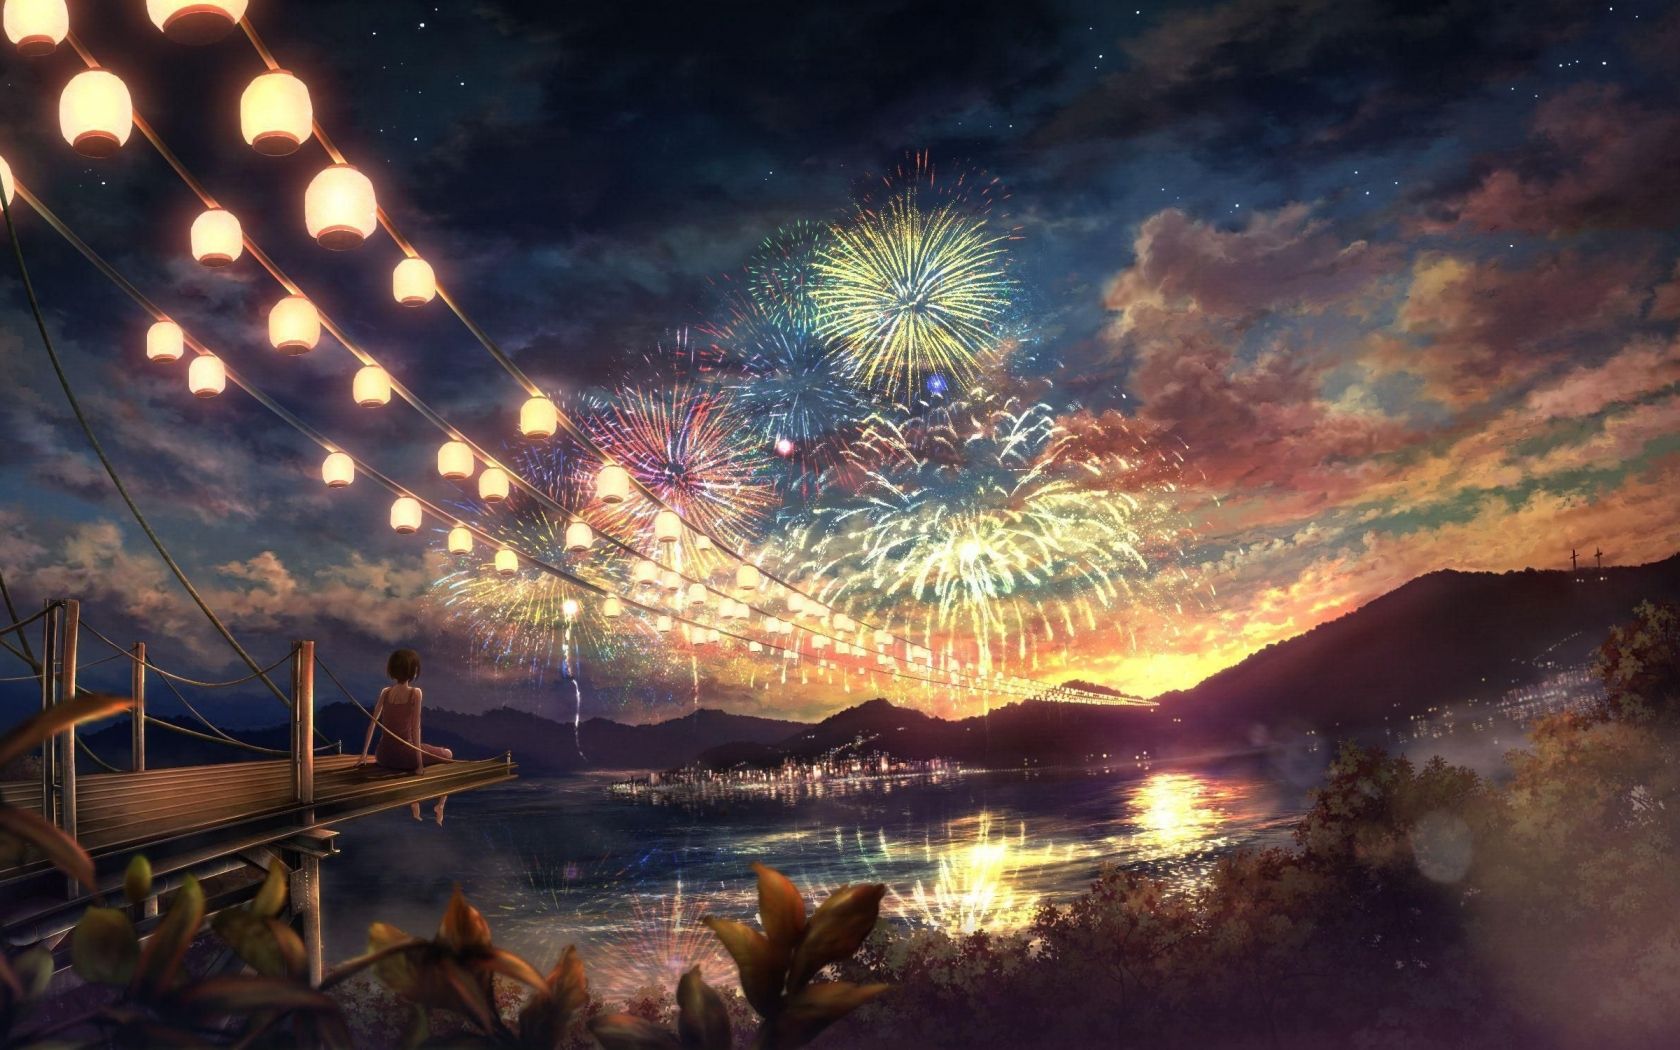 Free download Anime Scenery Wallpaper Beautiful Anime Scenery Wallpaper 37 [2667x1500] for your Desktop, Mobile & Tablet. Explore Cool Anime Landscape Wallpaper. Cool Anime Landscape Wallpaper, Cool Landscape Wallpaper, Cool Anime Background